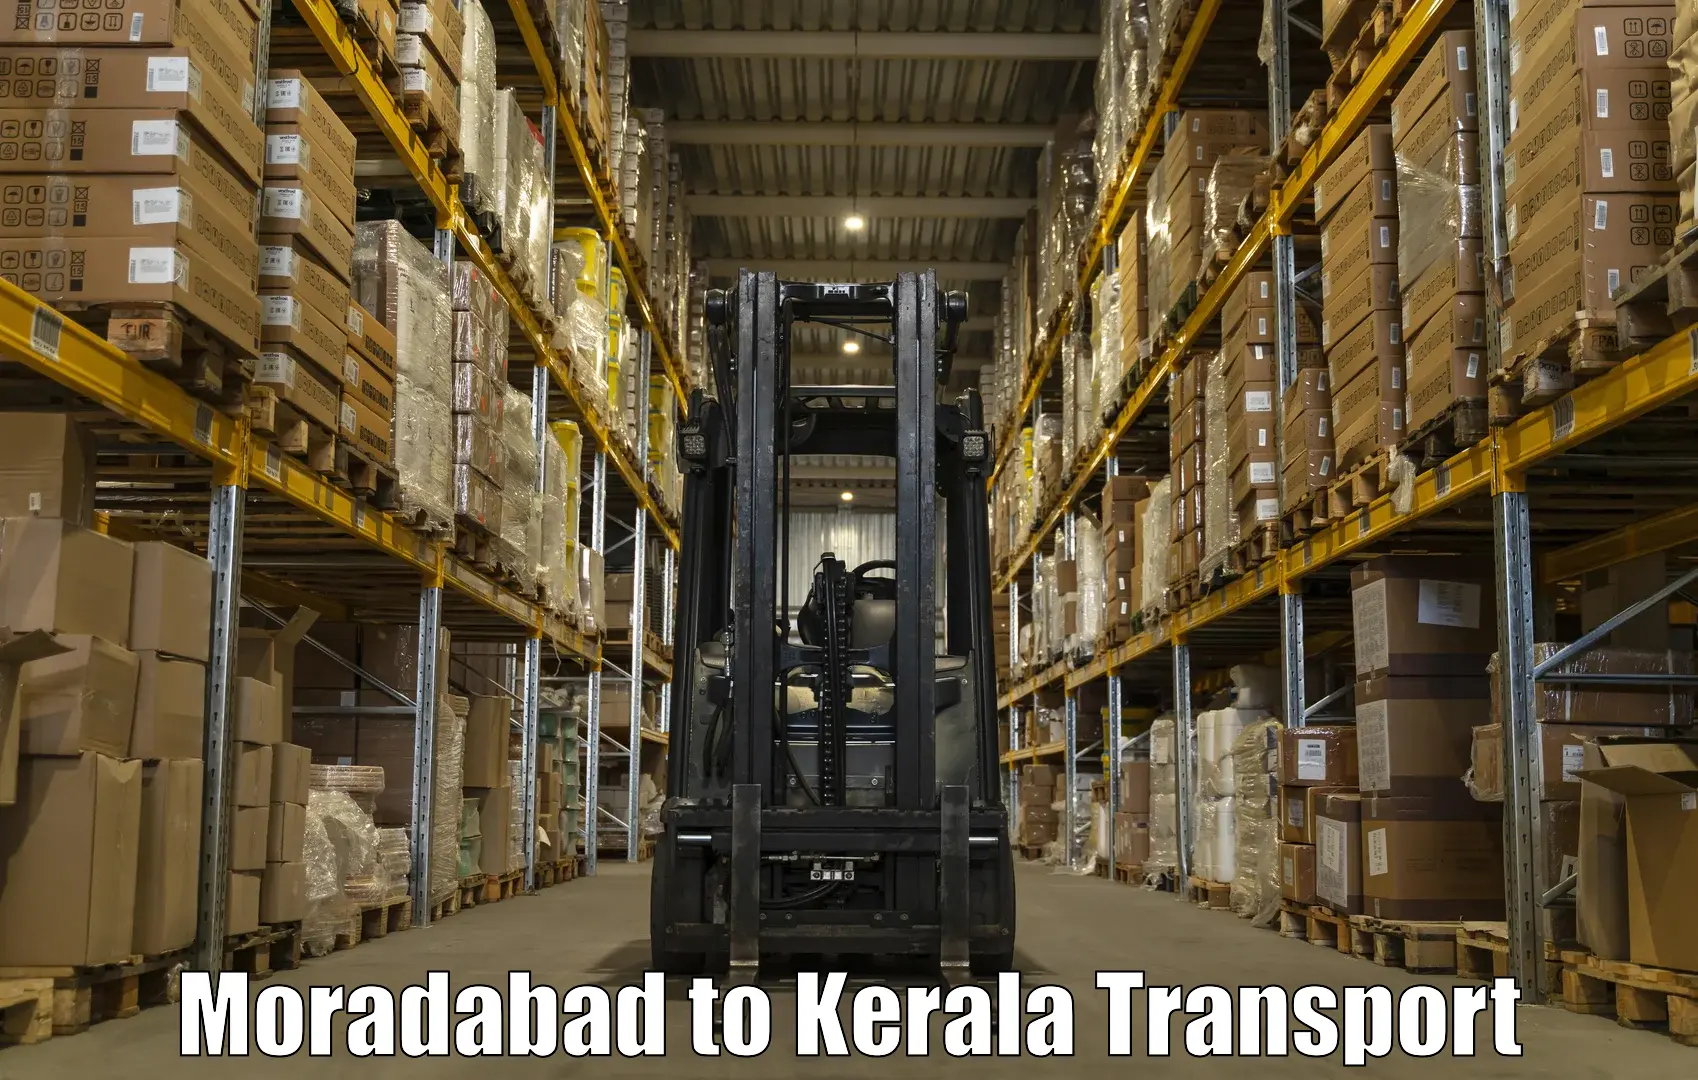 Air freight transport services in Moradabad to Kannur